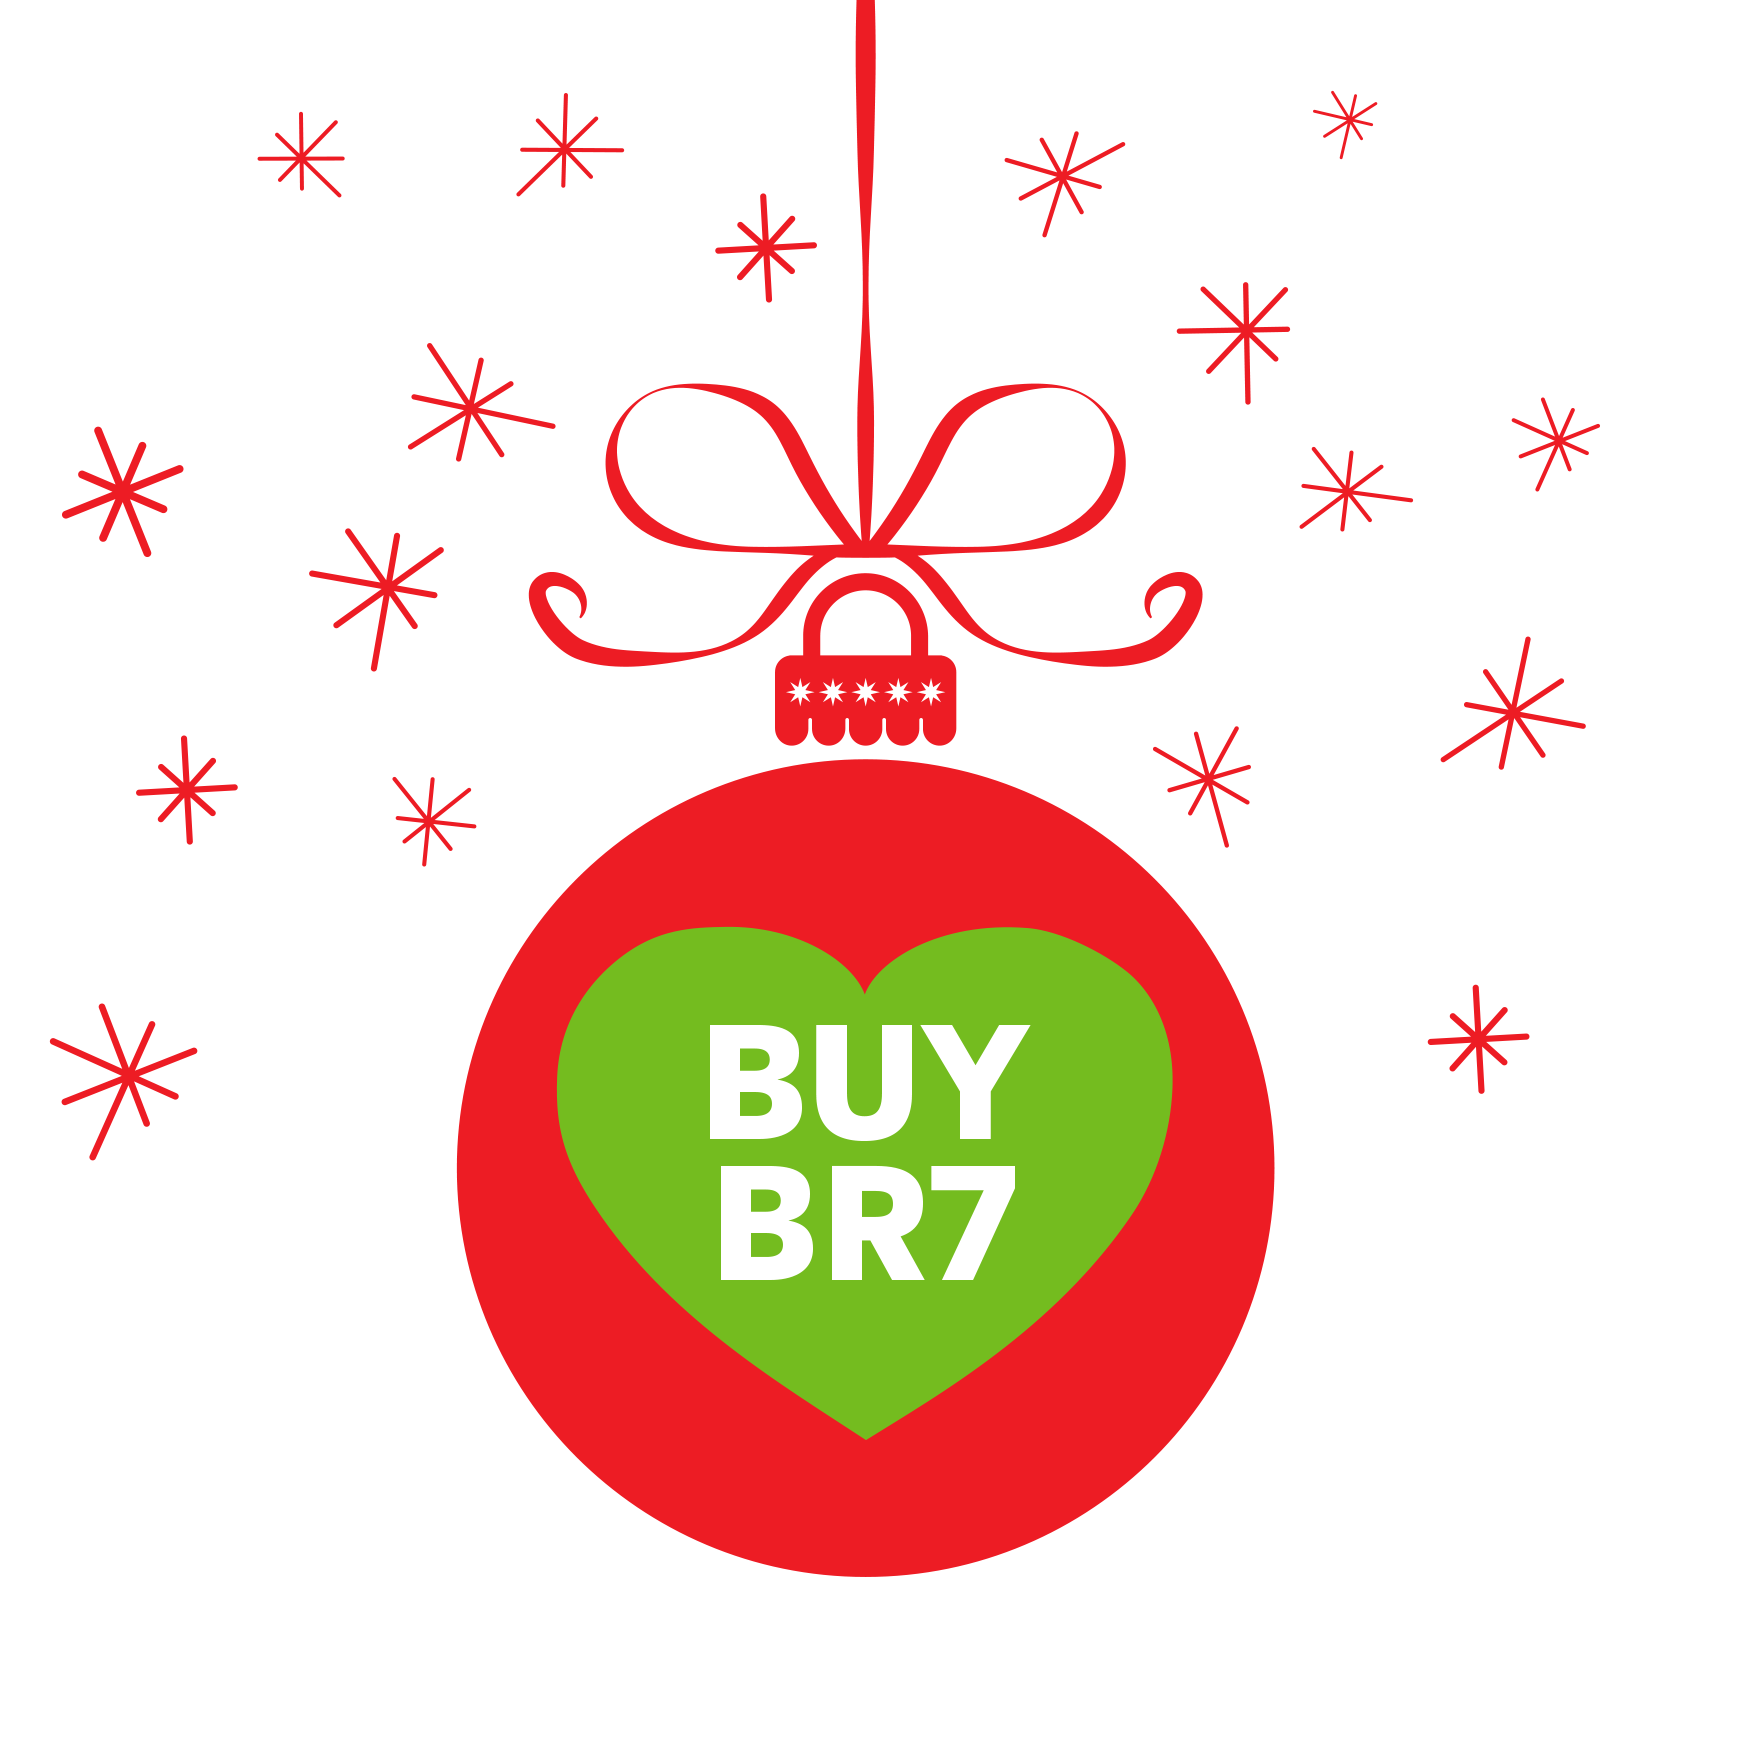 Christmas is coming – support our Independent shops – Buy BR7!